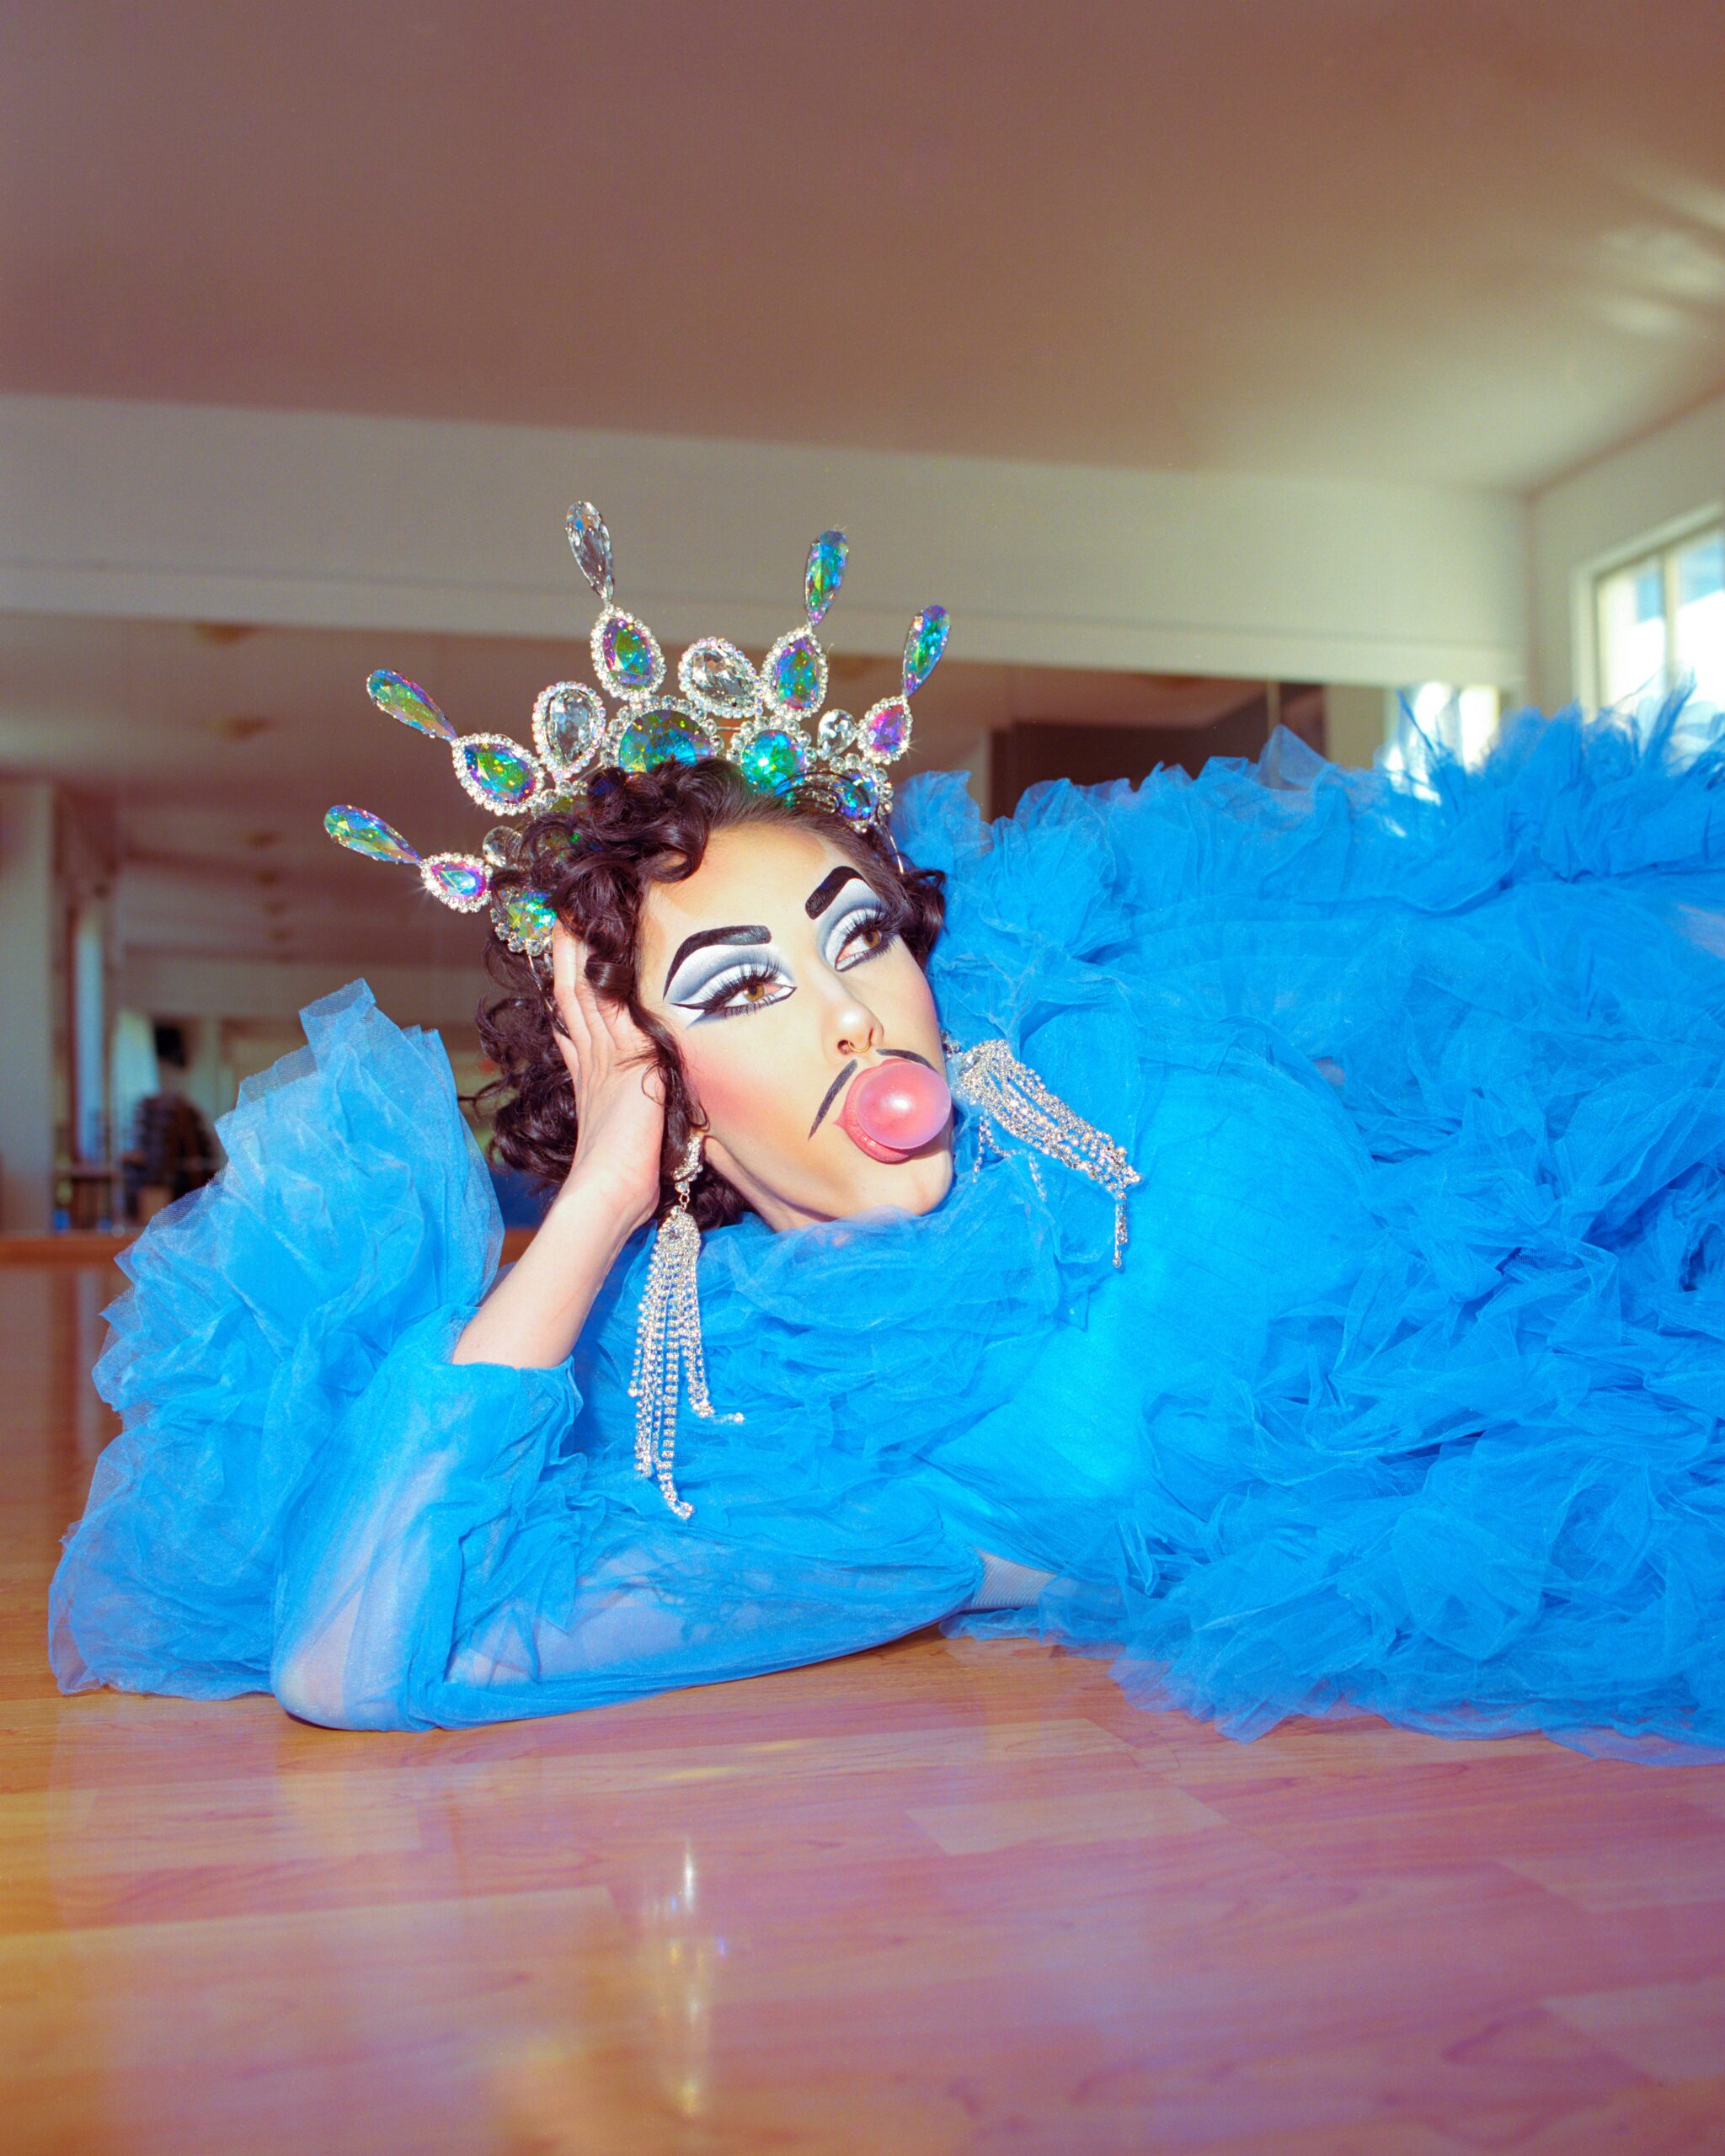 Genesis lying on their side on the floor wearing a blue dress, a tiara with blue stones, and blowing a gum bubble.